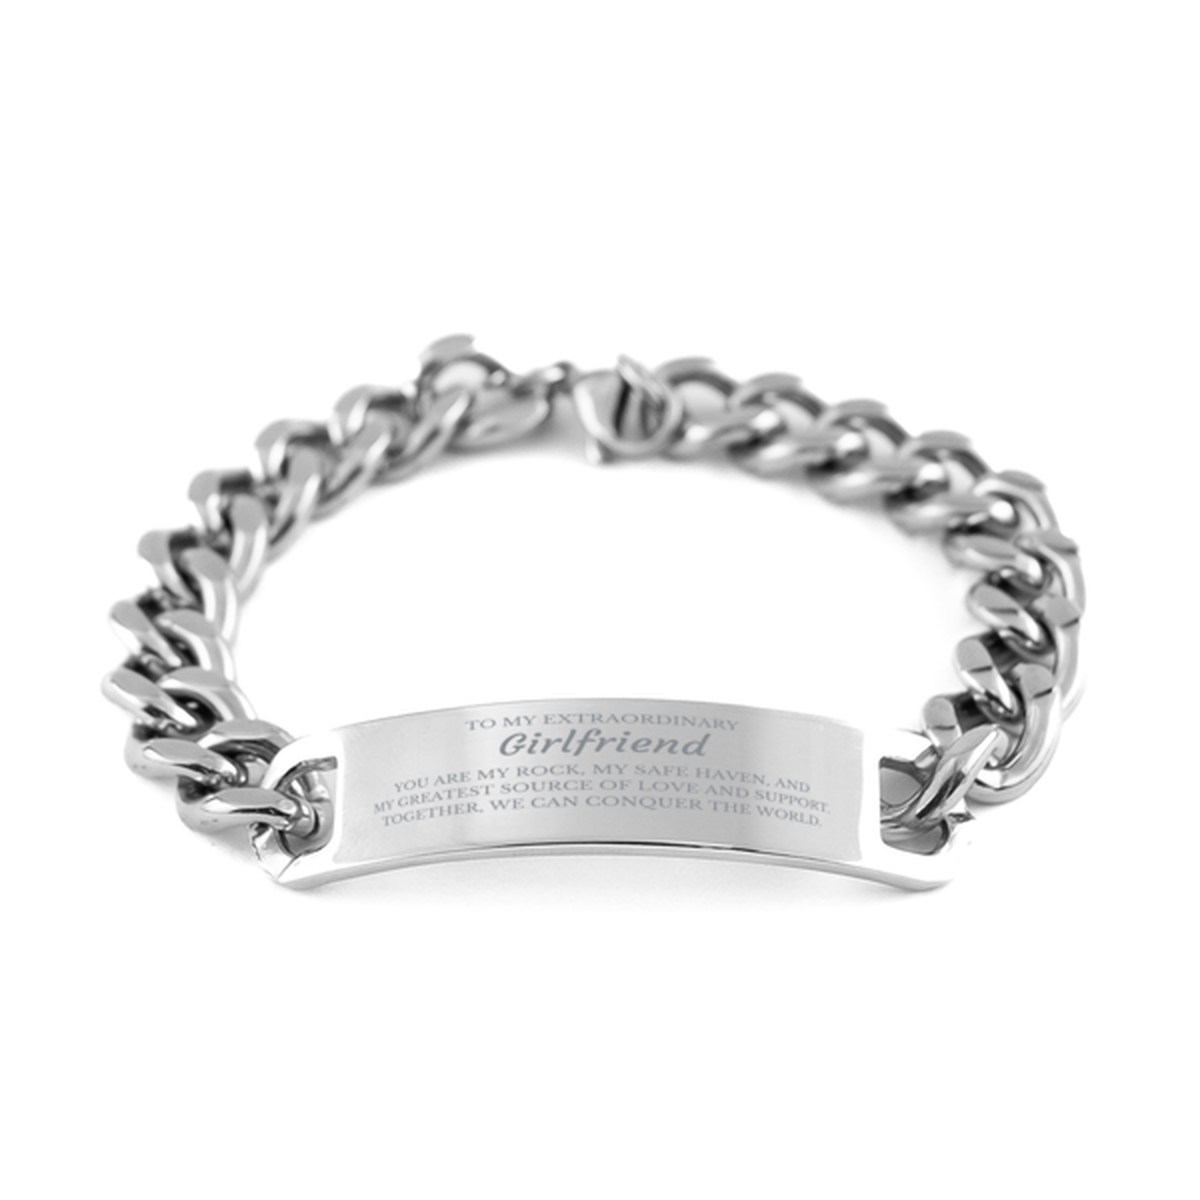 To My Extraordinary Girlfriend Gifts, Together, we can conquer the world, Birthday Cuban Chain Stainless Steel Bracelet For Girlfriend, Christmas Gifts For Girlfriend